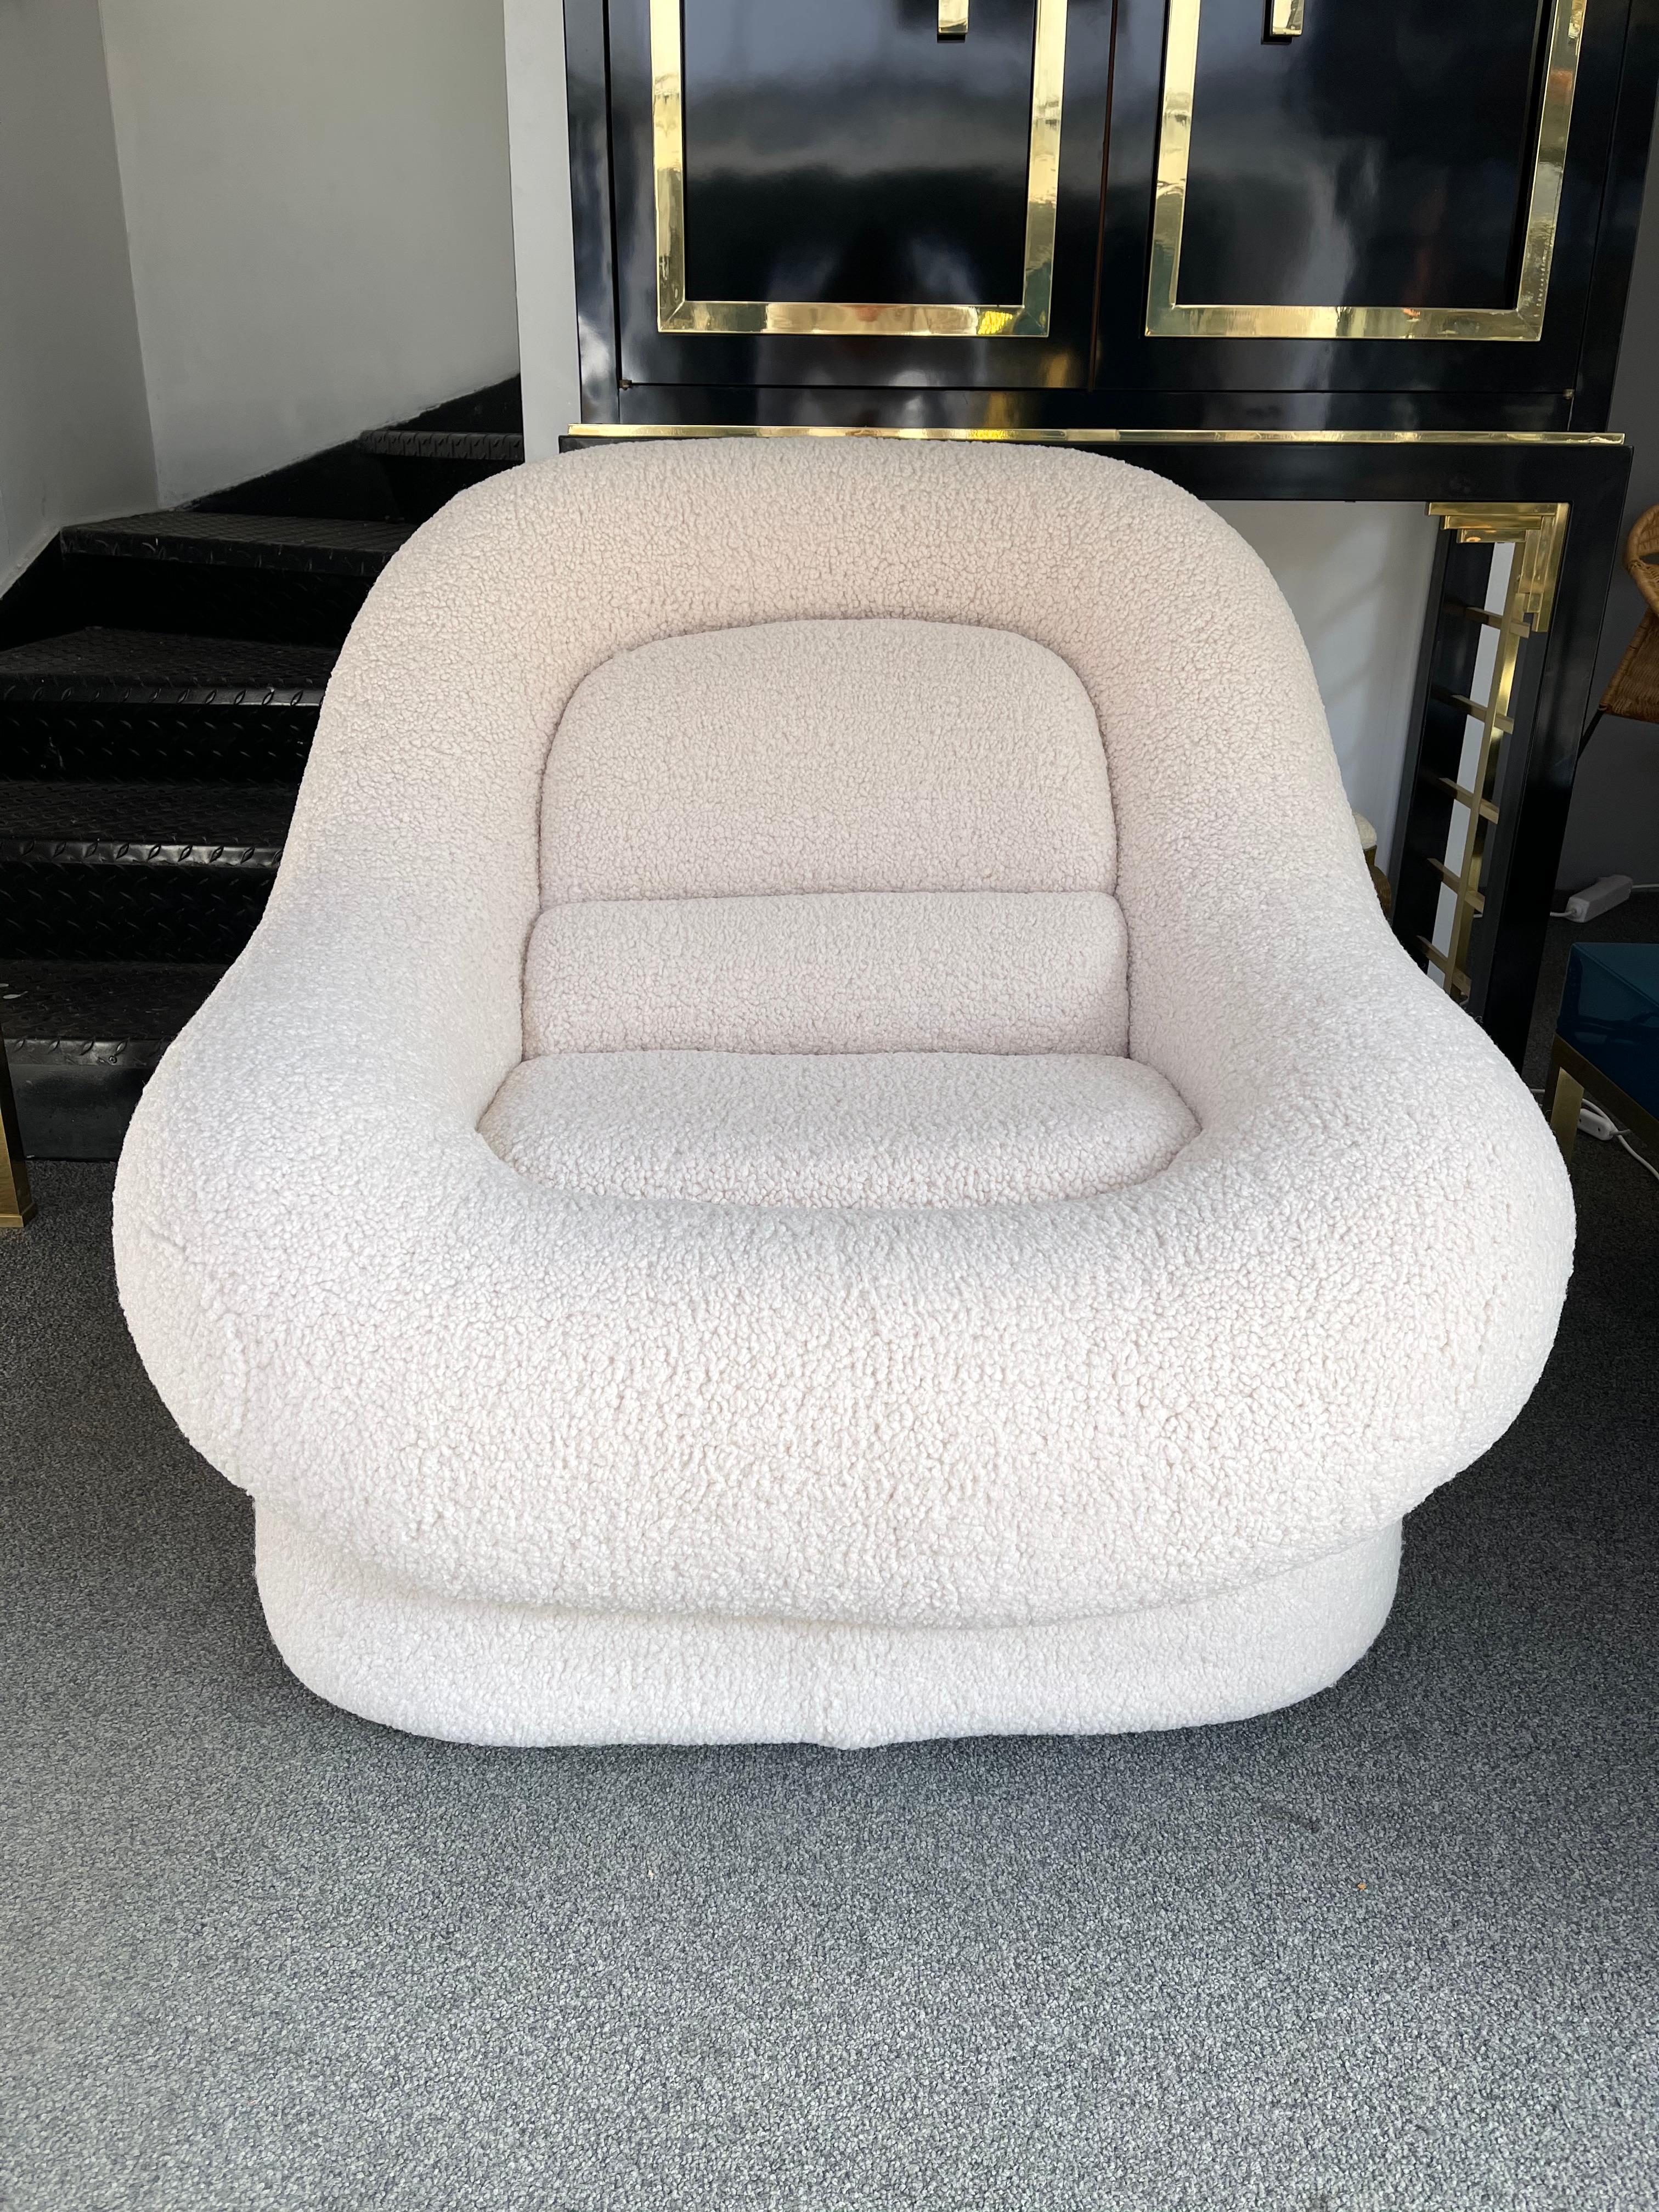 Rare pair of armchairs lounge chairs model Nuava by Emilio Guarnacci for his editor 1P (1969) New upholstery with a bouclé sheep style fabric. Original stamp under. On request Original documentation. Famous design like Gio Ponti, Gianfranco